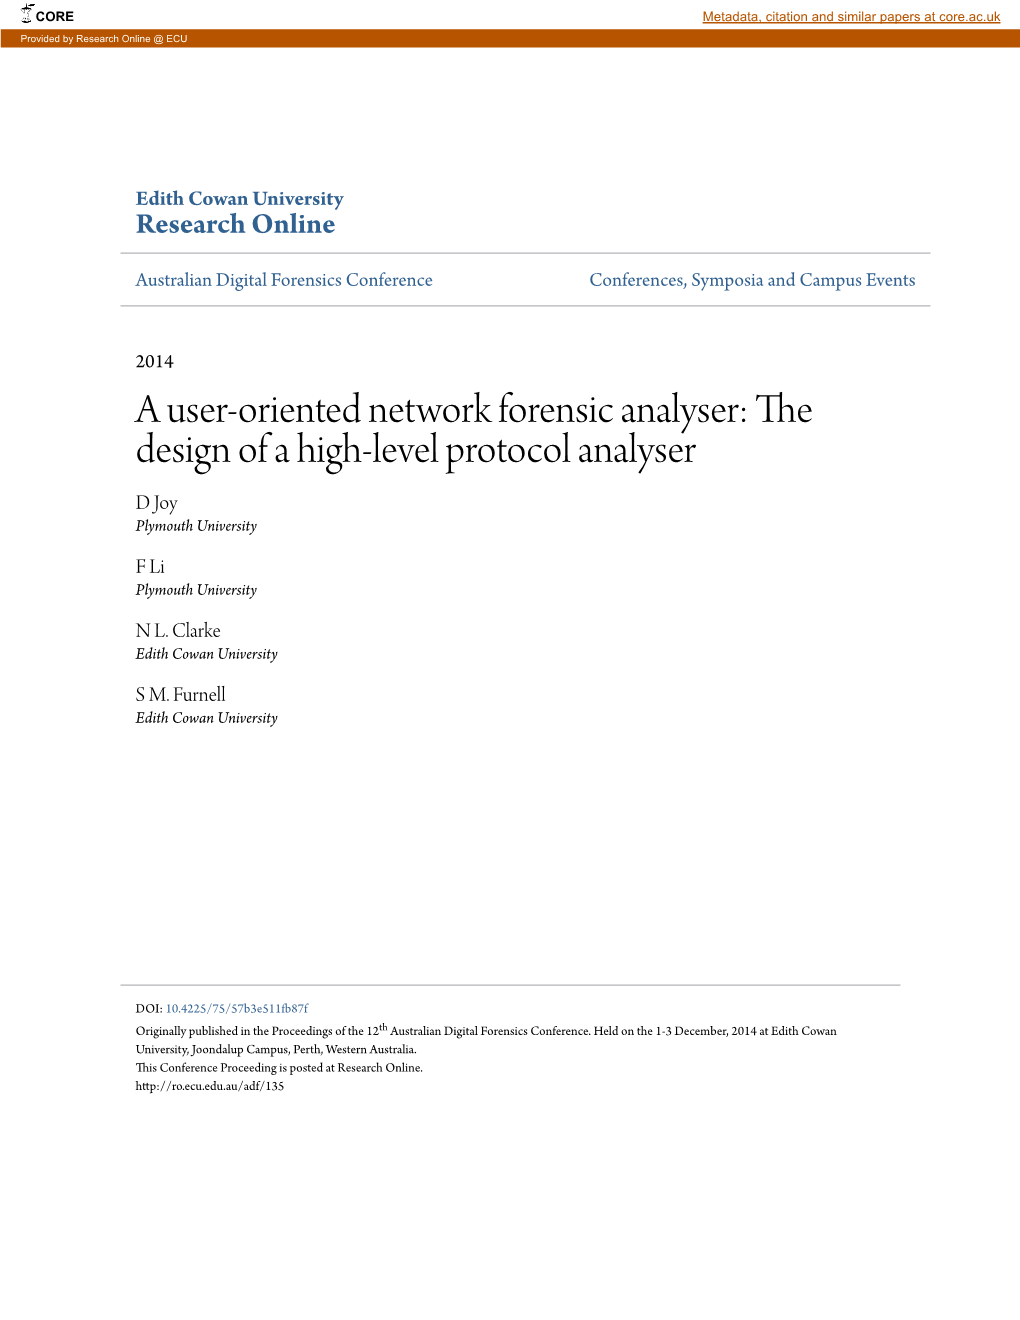 A User-Oriented Network Forensic Analyser: the Design of a High-Level Protocol Analyser D Joy Plymouth University